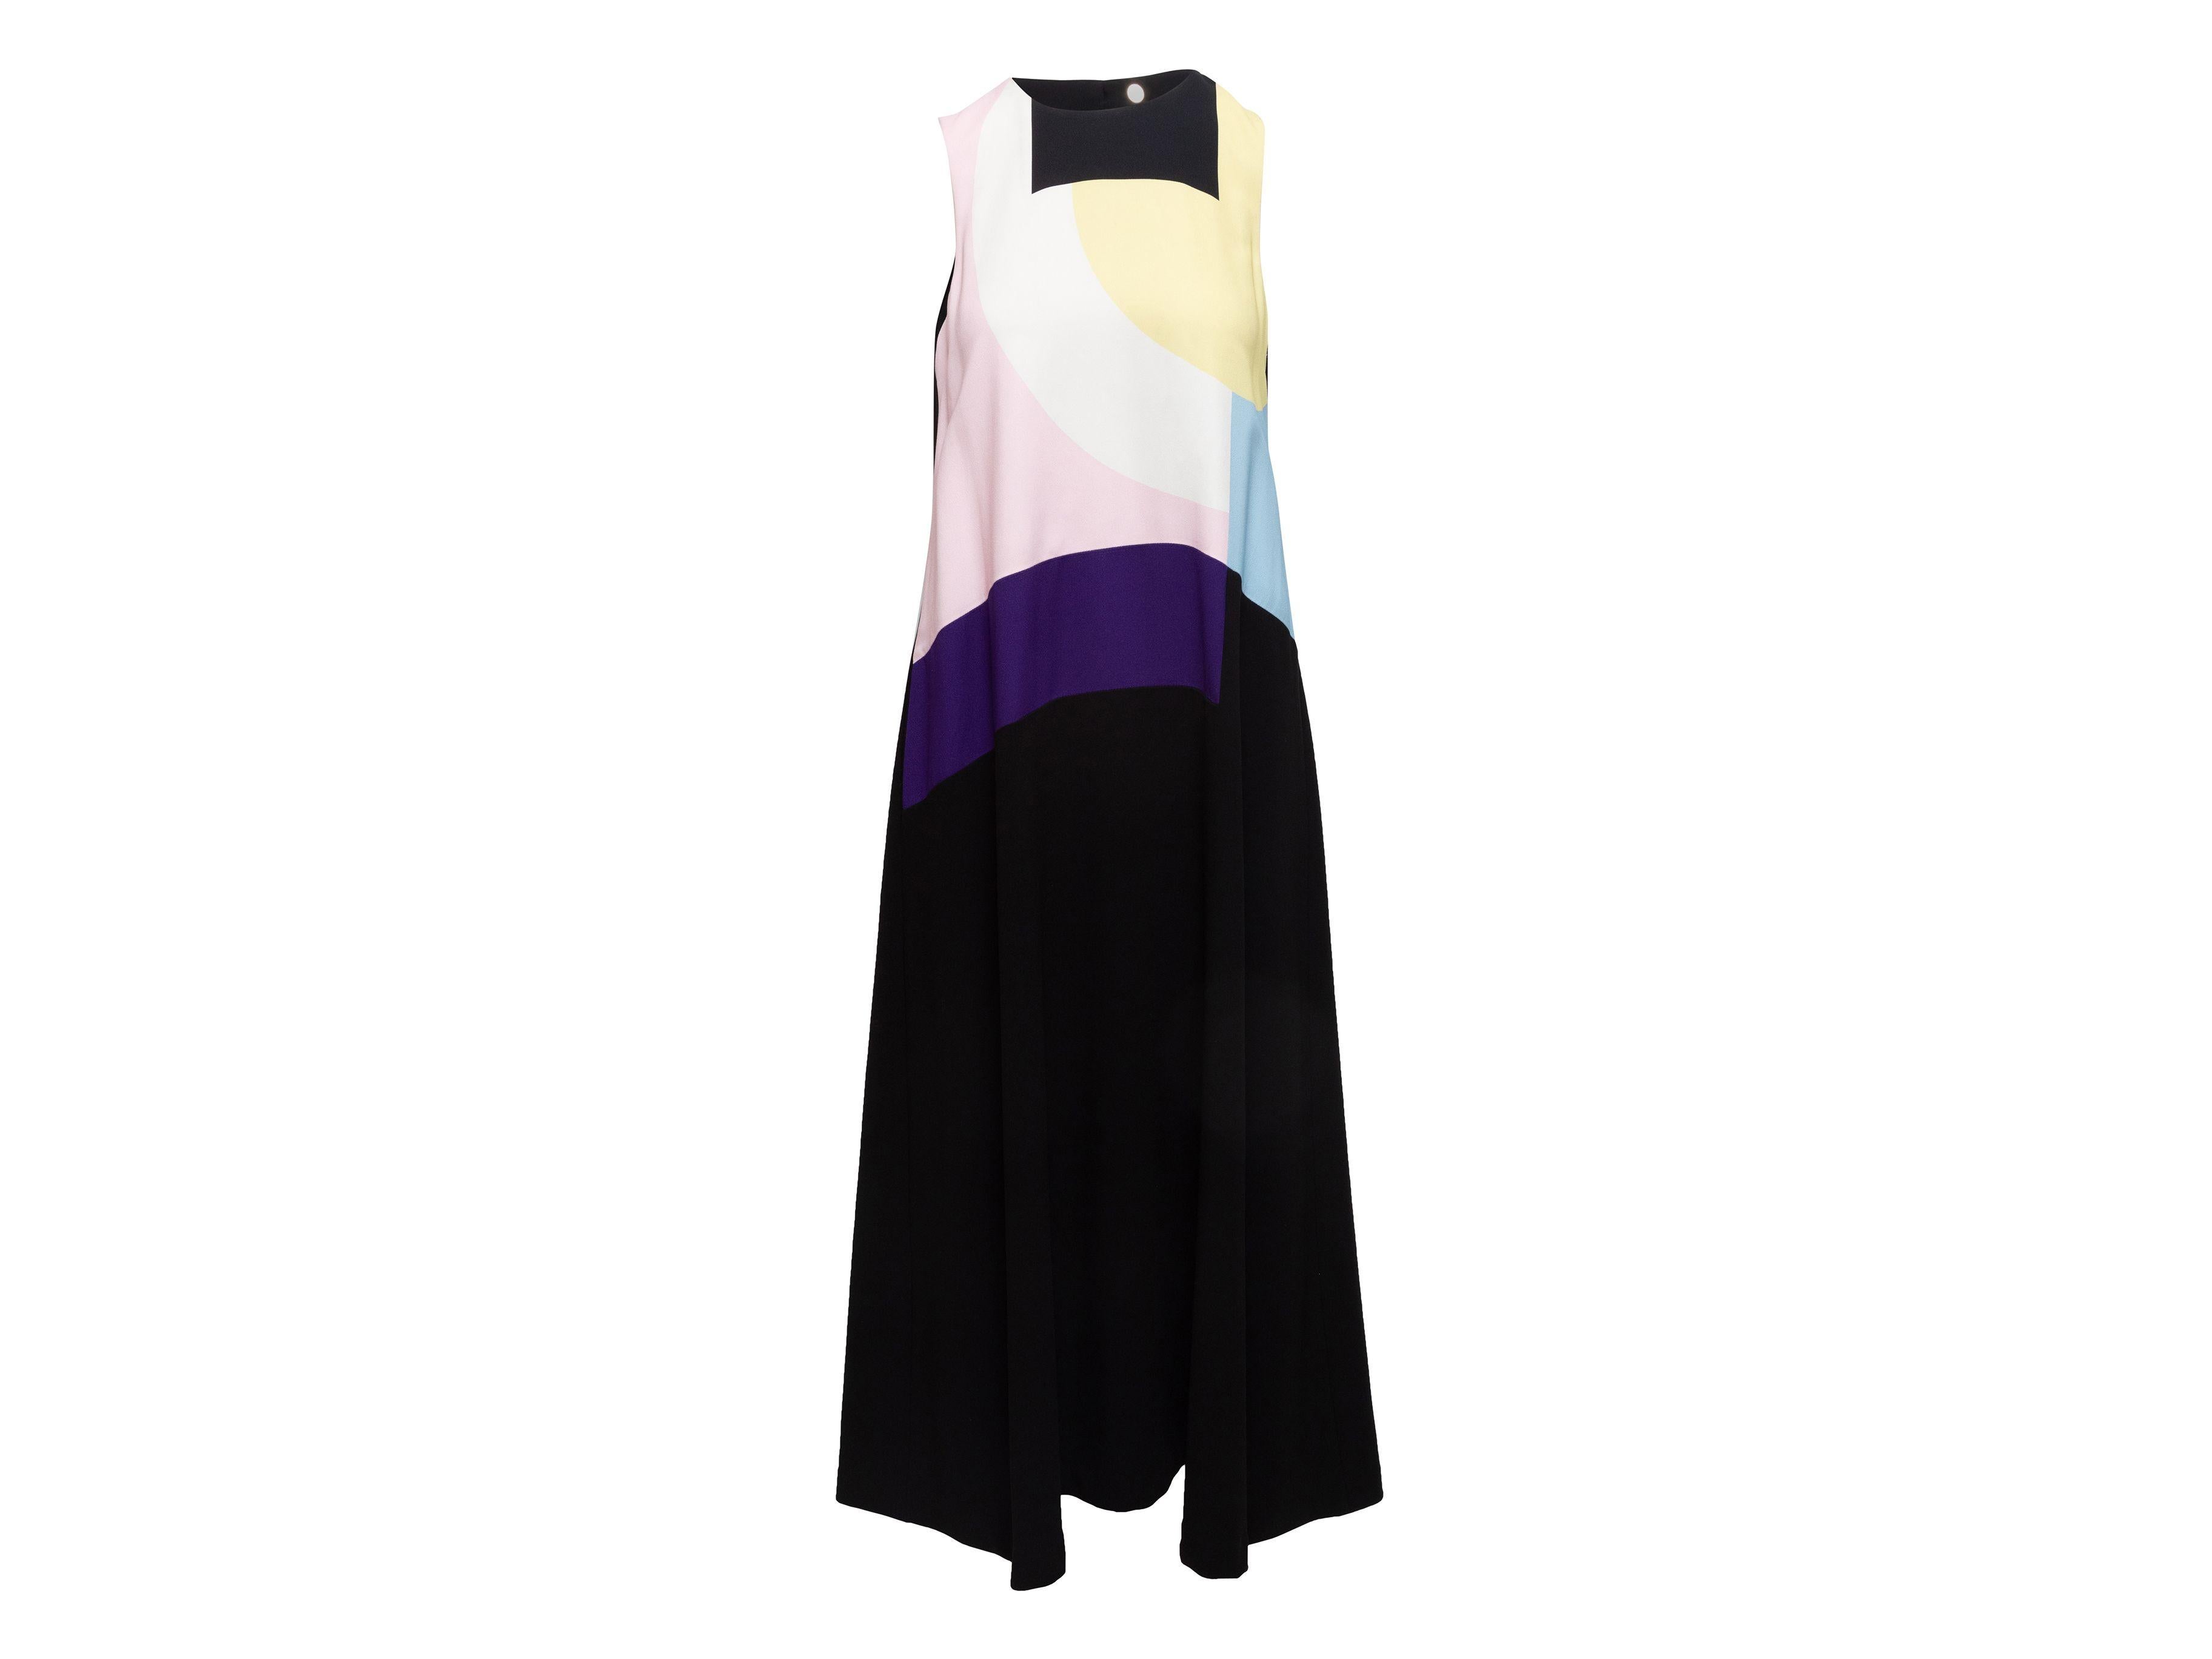 Product Details: Black and multicolor color block sleeveless maxi dress by Lisa Perry. Crew neckline. Closures at back. 36